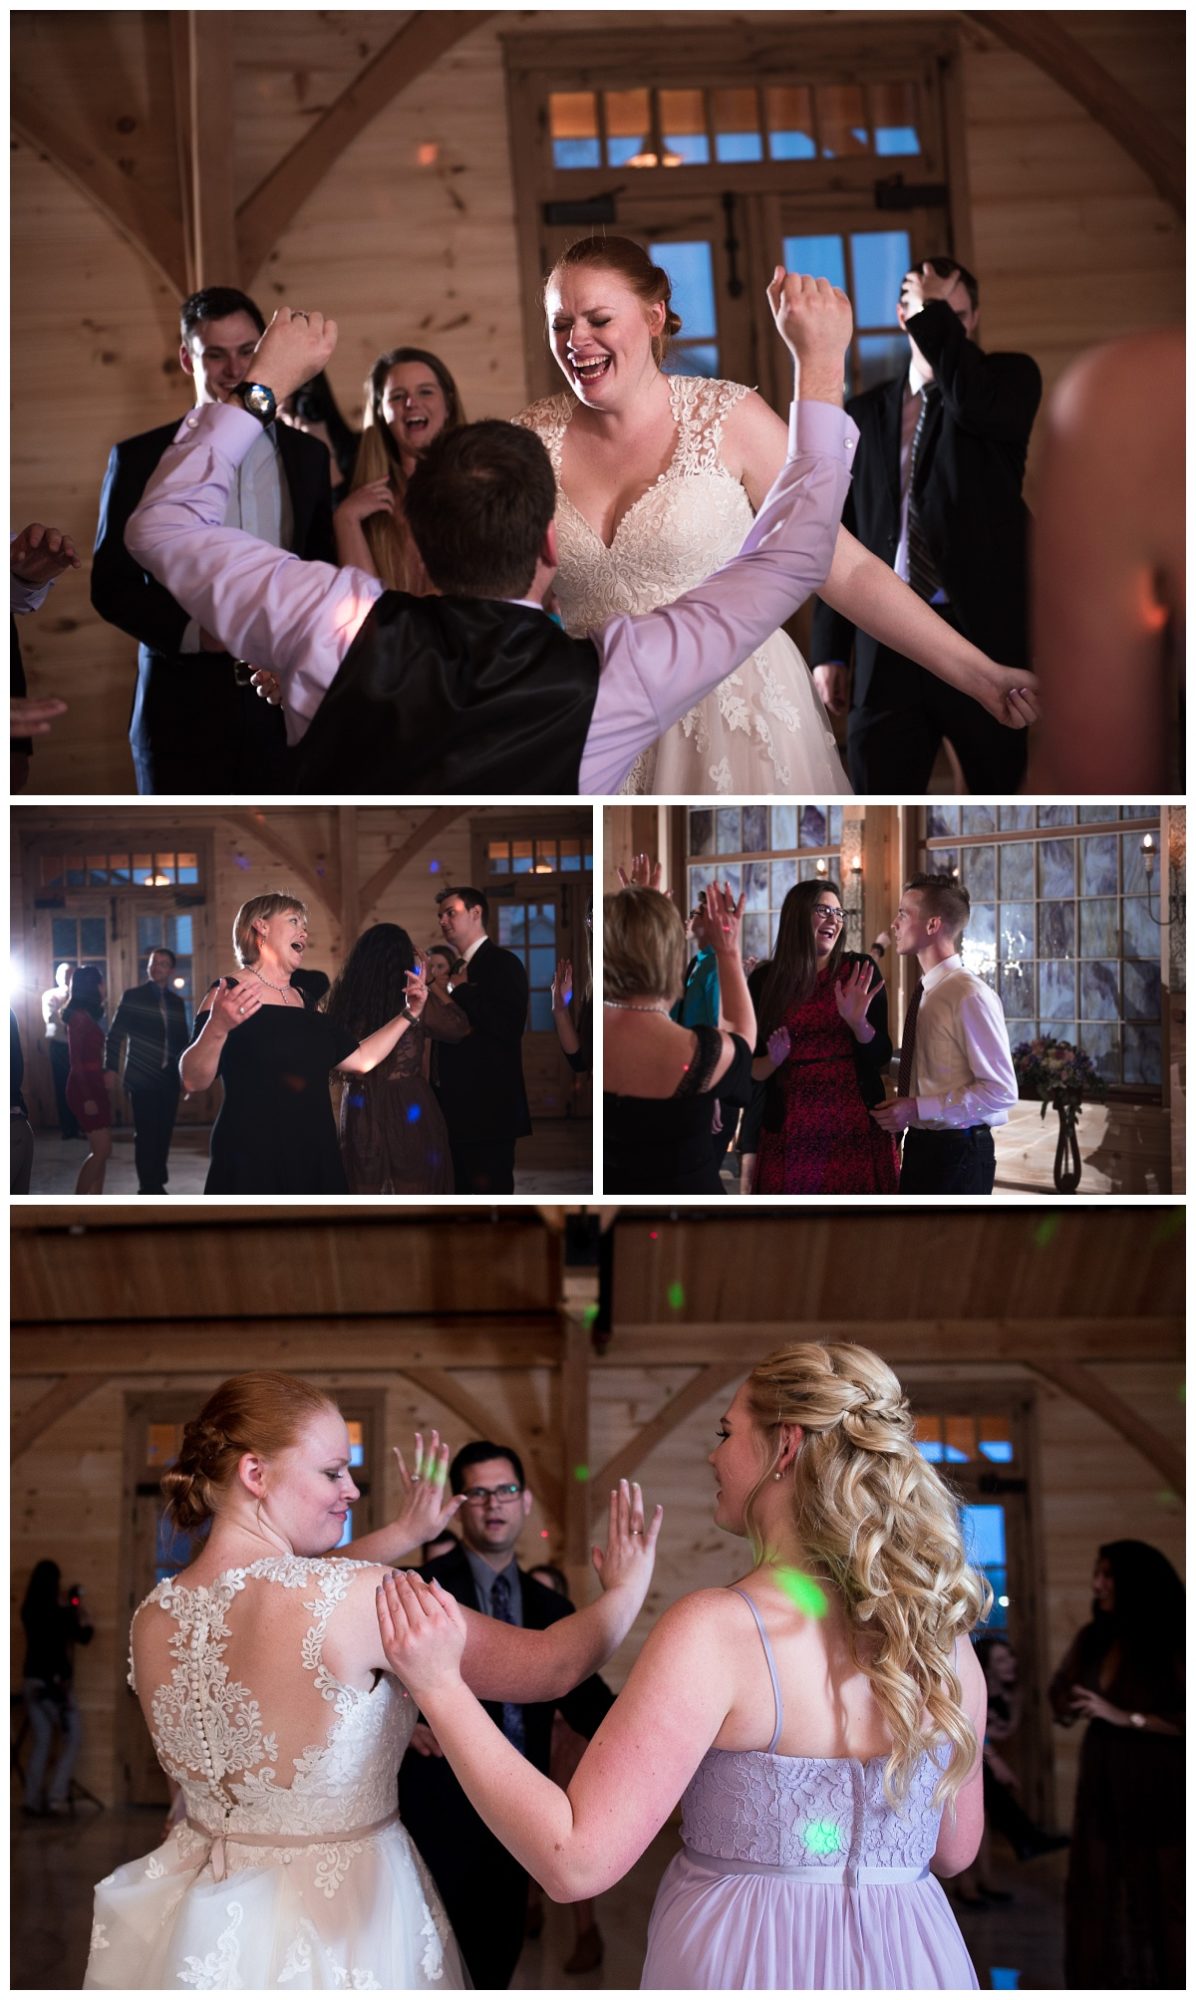 outtakes from the dance floor at Stone House of St. Charles, a St Louis wedding venue